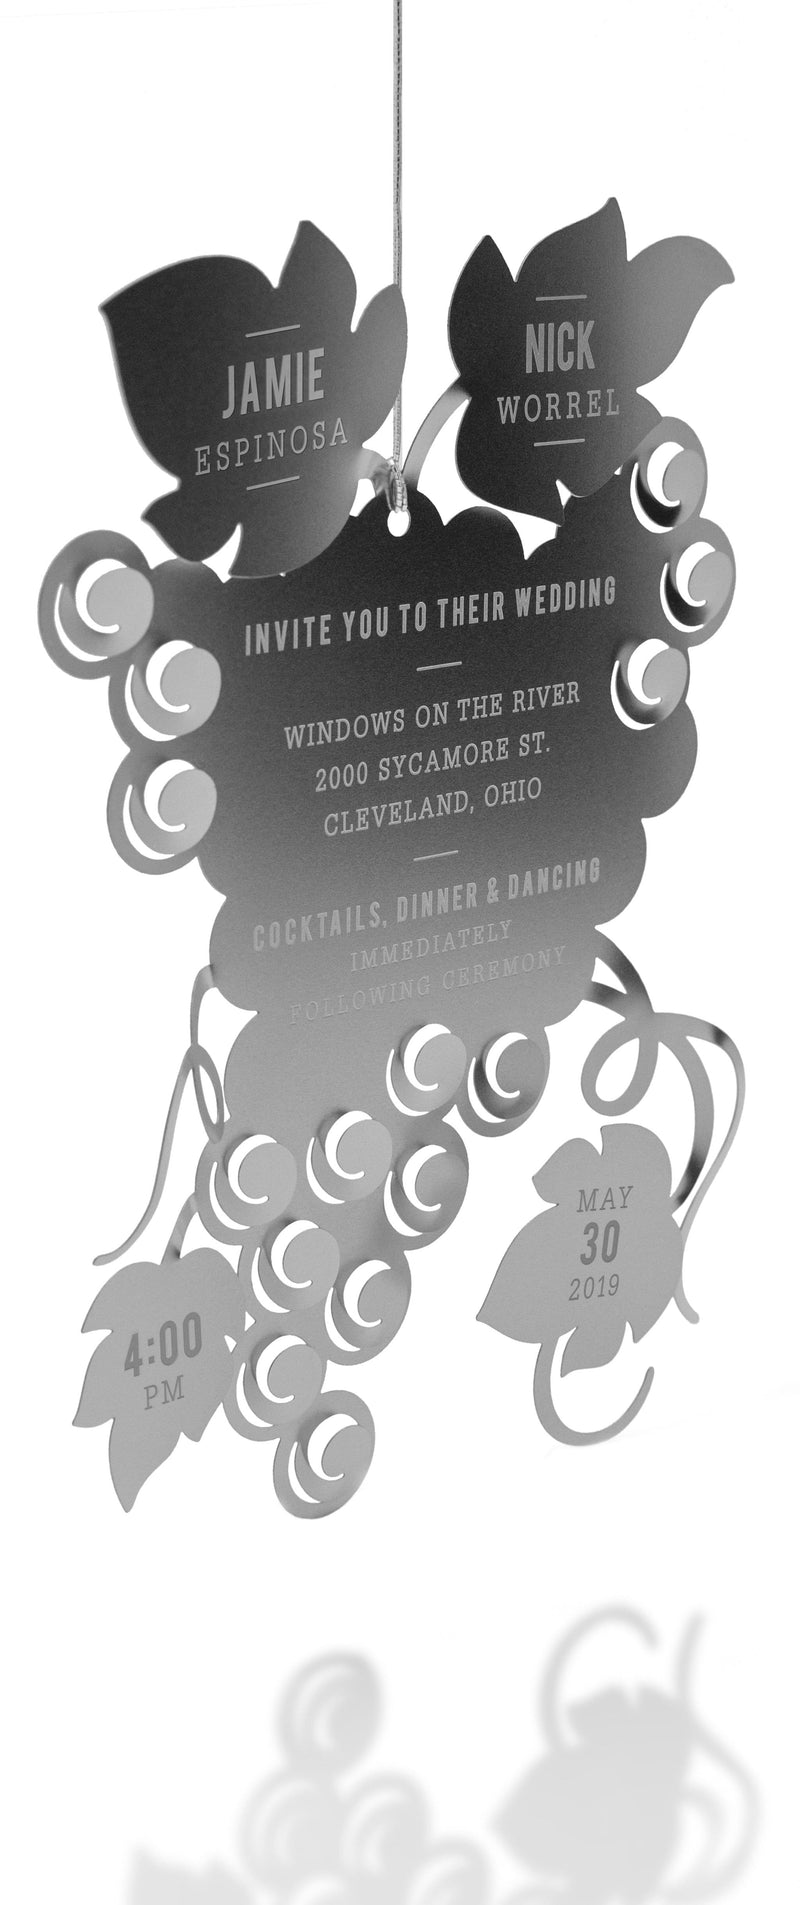 Unique Vineyard Event Invitations Made from Metal